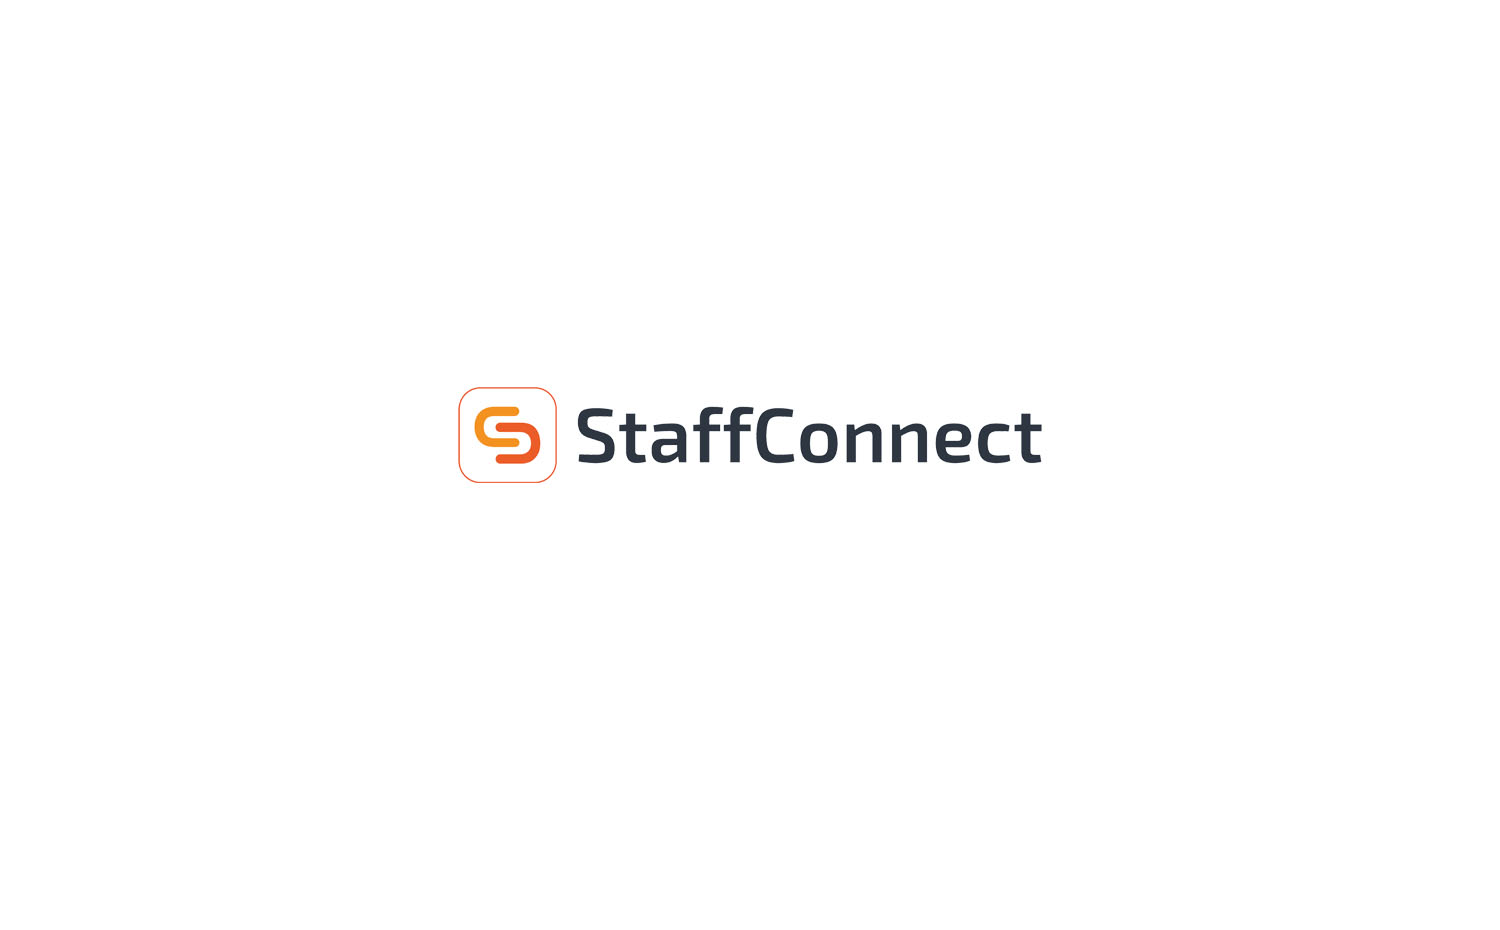 StaffConnect Announces Partnership With Lumi to integrate Meetoo Audience Engagement Technology